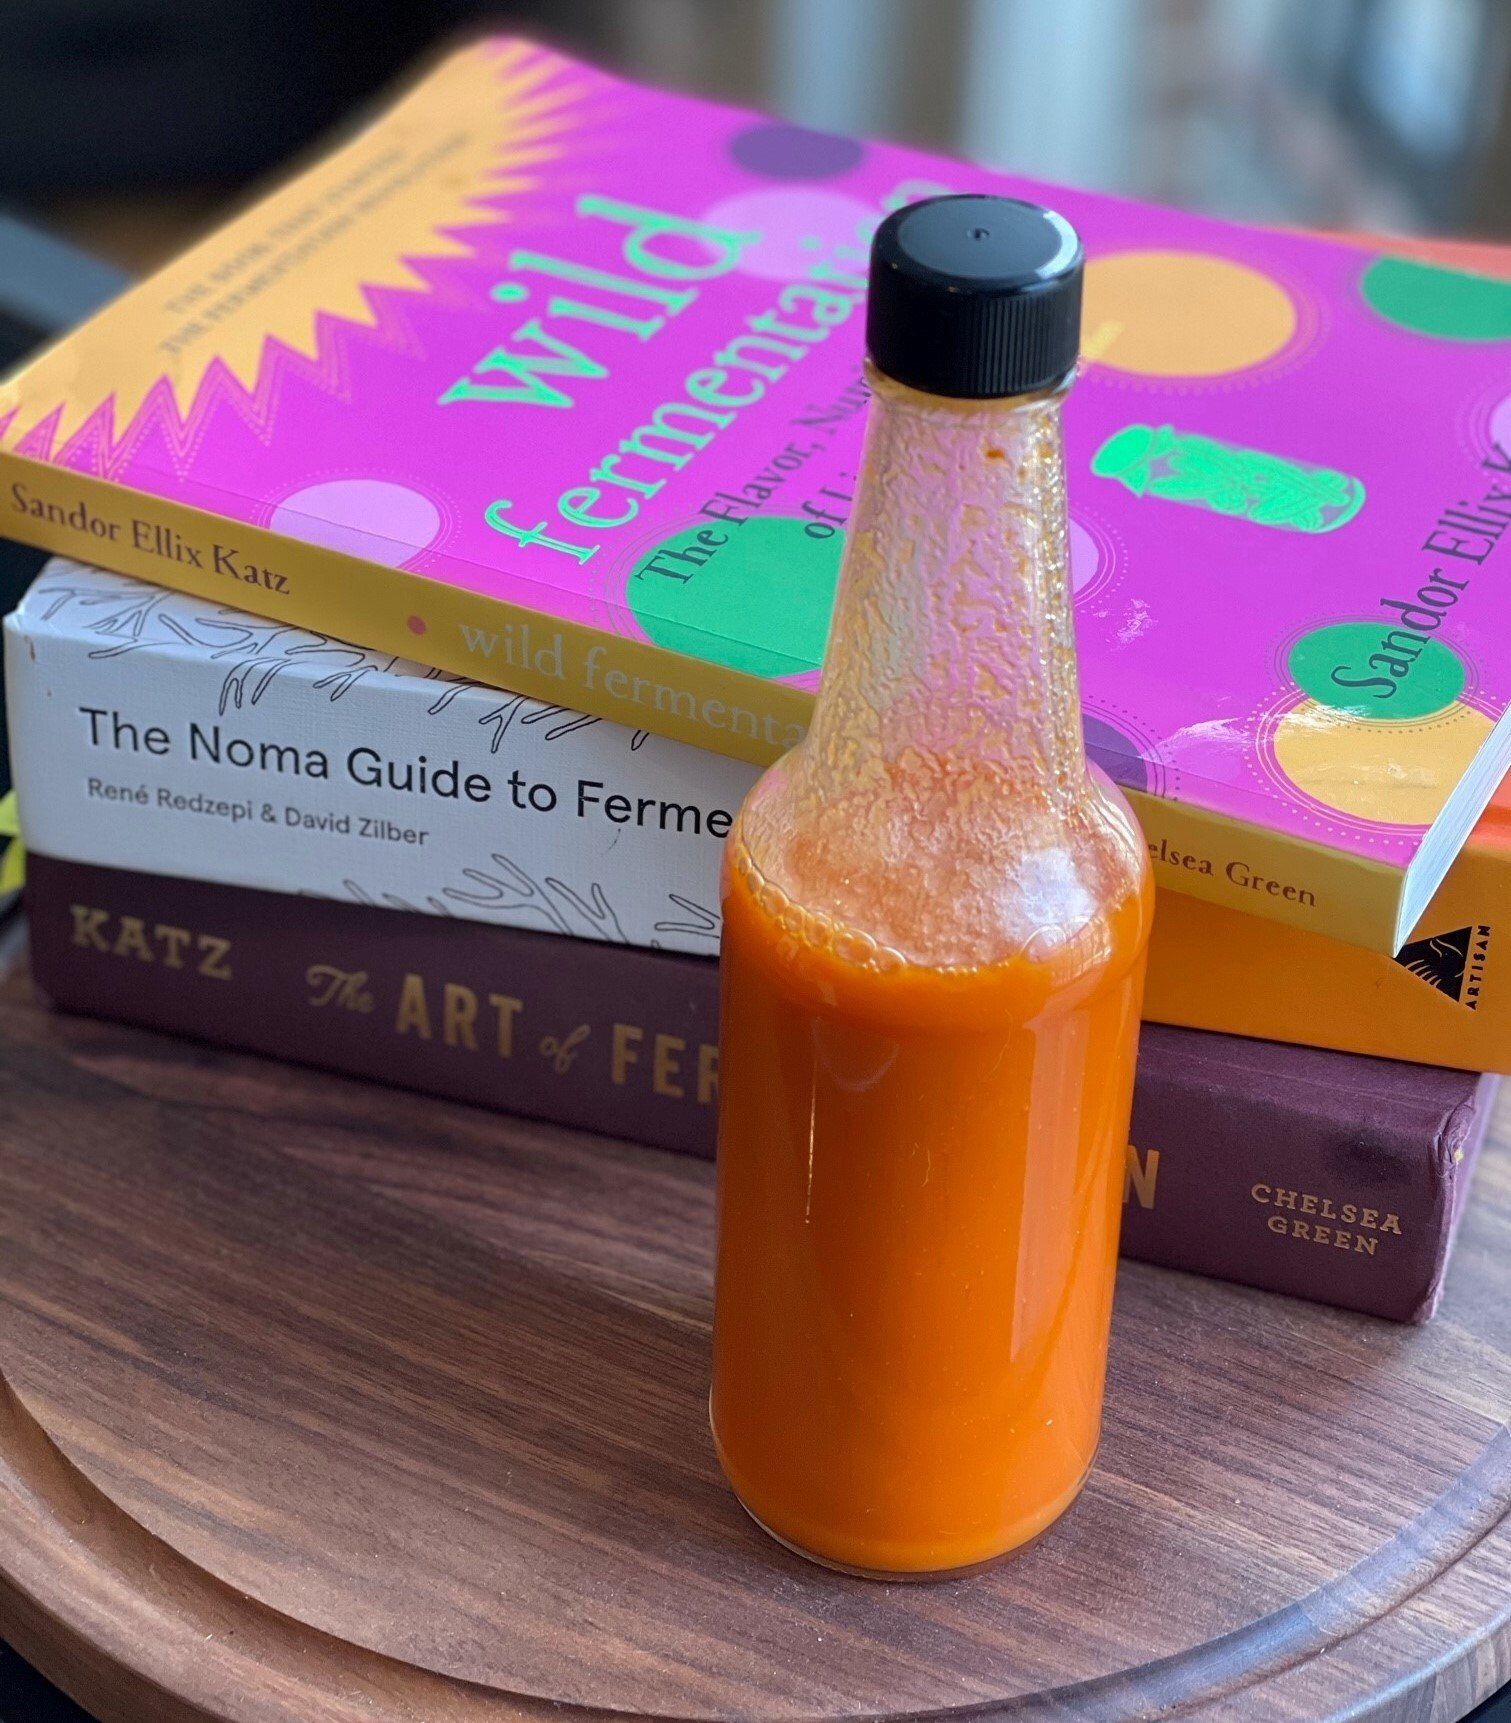 bottle of orange-colored hot sauce with books in the background